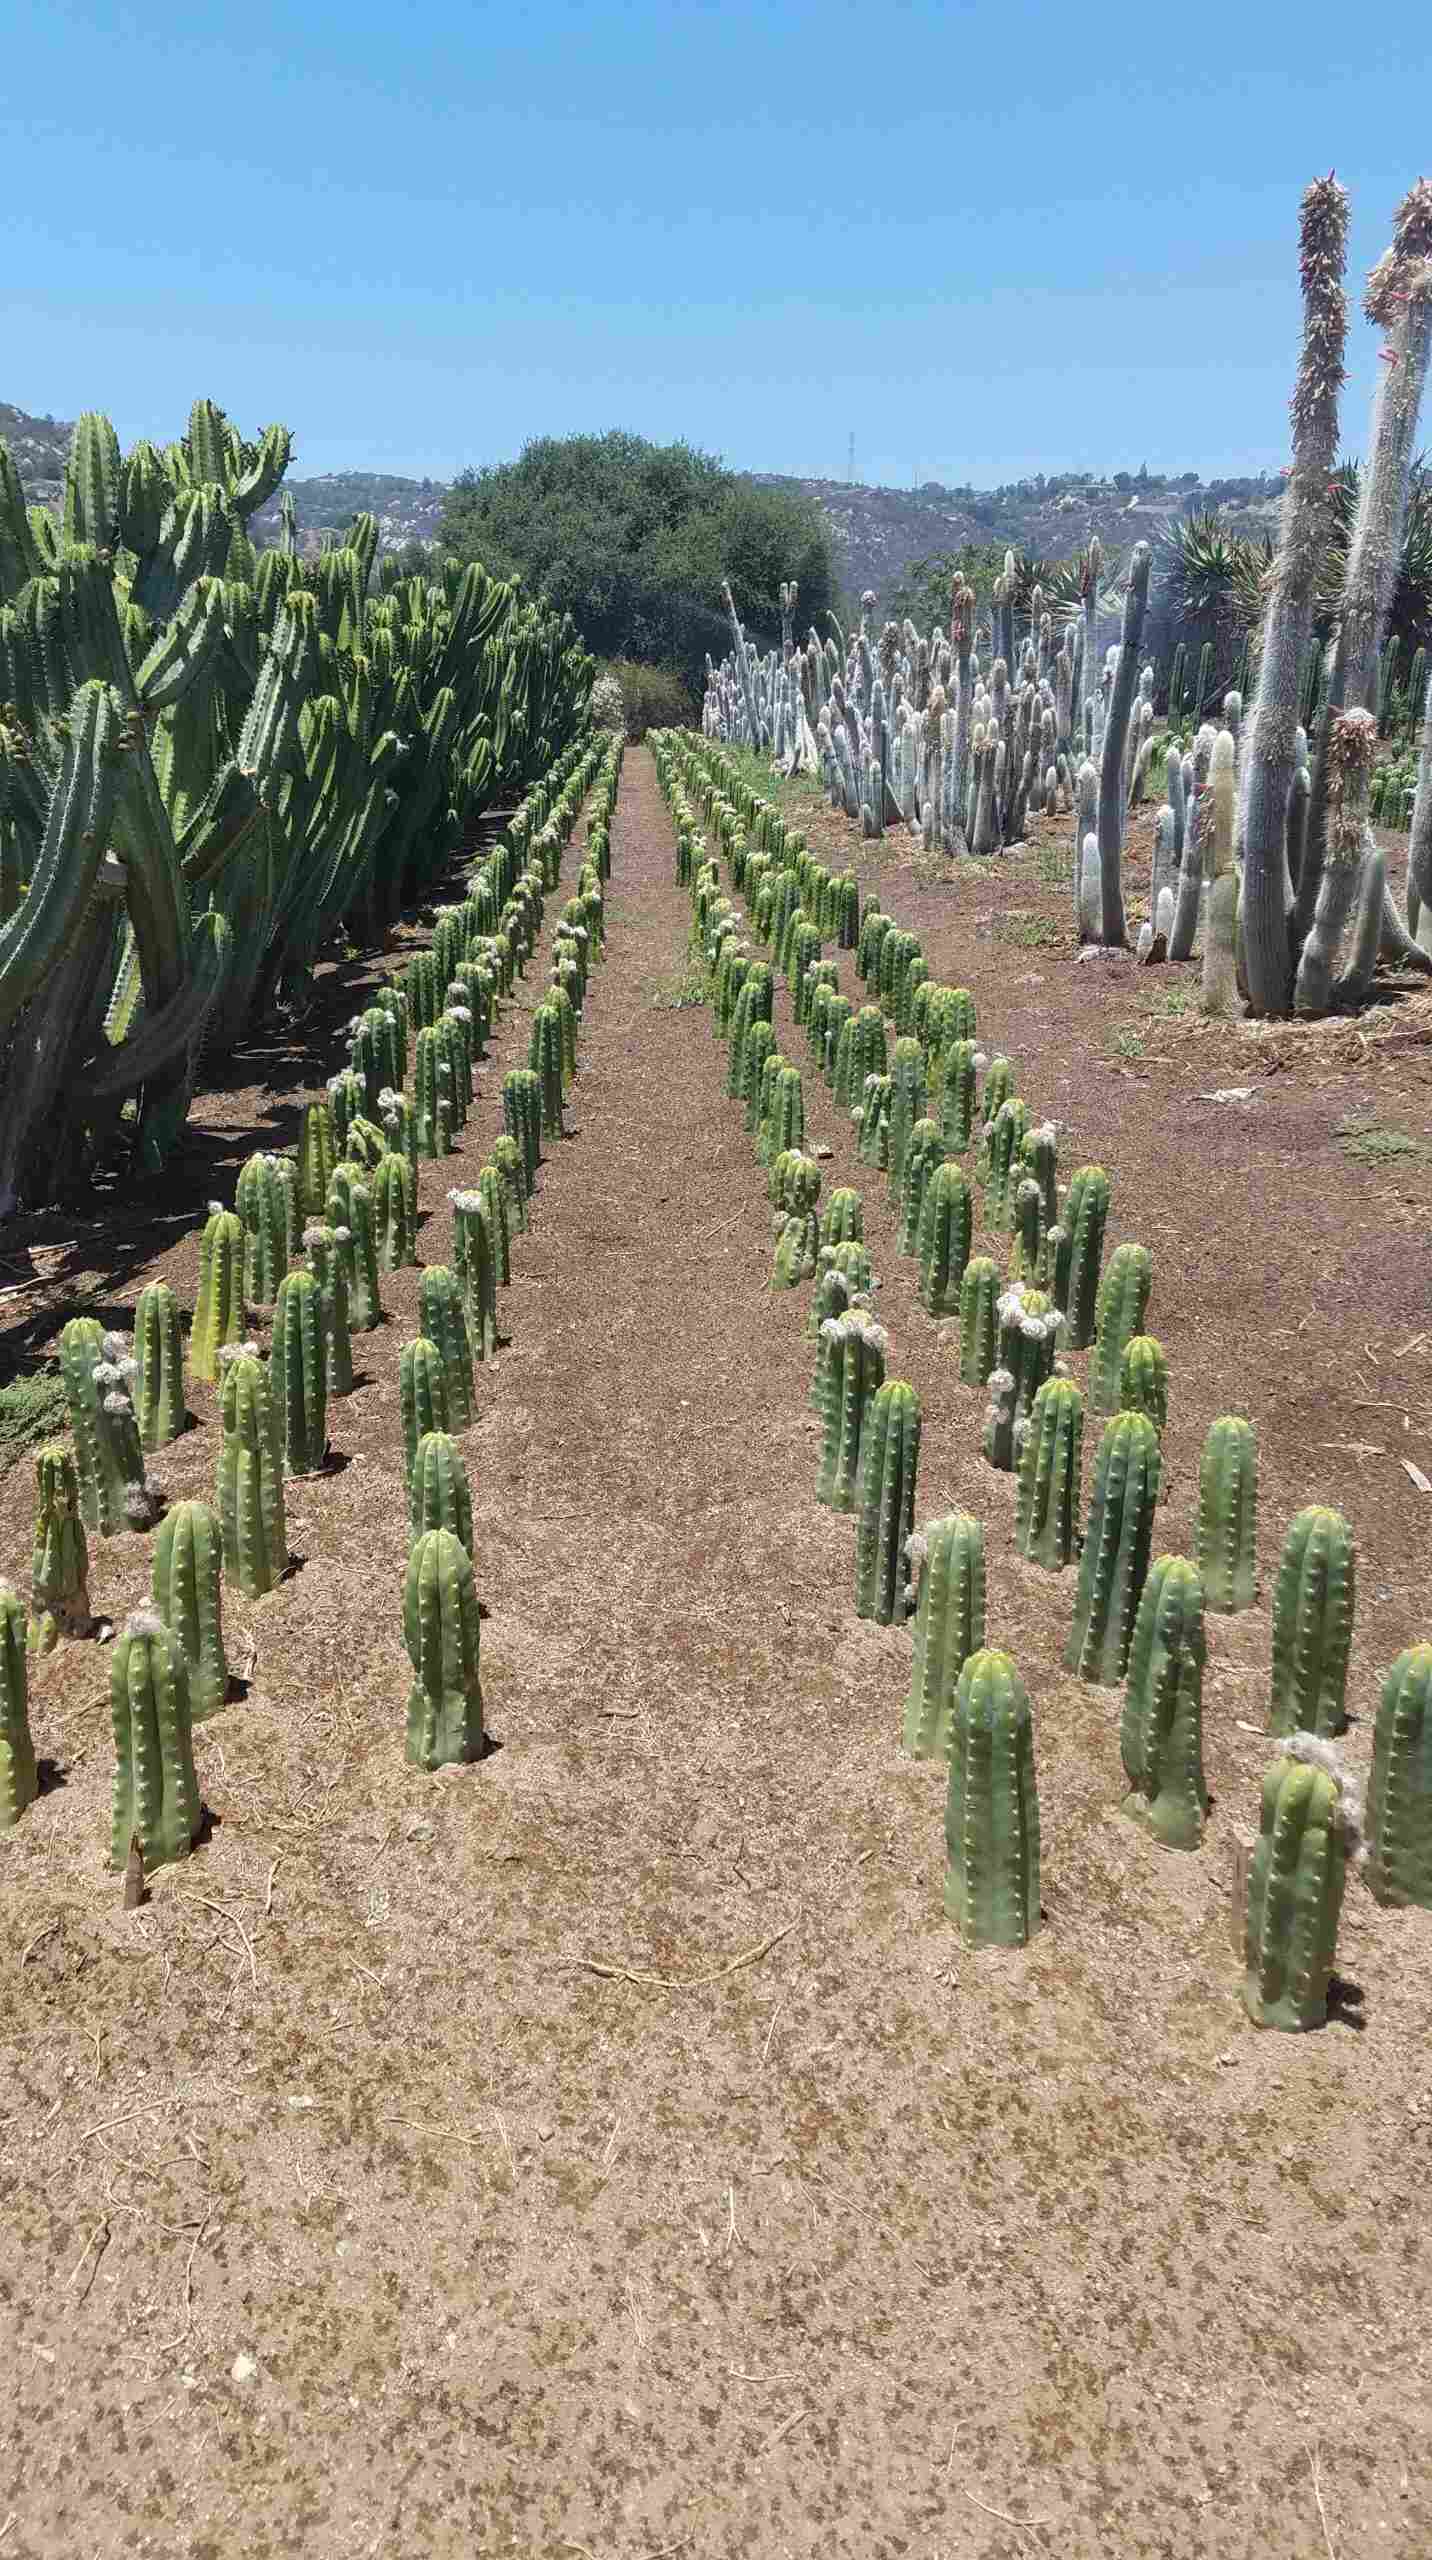  San Pedro Cactus Legality Explained As we know it previously the San Pedro cactus can be legally grown in many areas. However, since it's known from the production of mescaline growing it for this purpose is illegal in the US. The only cacti that has been specifically scheduled but the US government as a controlled substance is peyote. Regarding the legality or legality of the growth of the San Pedro cactus, your intent will be crucial to any legal problems. Just as long as you do not intend to consume, prepare or sell these cacti as psychedelics growing this mescaline containing plant will rarely get you in trouble. Prosecutions for the production of masculine from the San Pedro cactus are rare, but they have happened. There was one case in South Dakota where a man was jailed for having 30g of dried Peruvian torch in his position another prosecution happened in Illinois where a man was sentenced to two-and-a-half years for the position of multiple kilograms of the cactus in a dried form clear intending to sell.